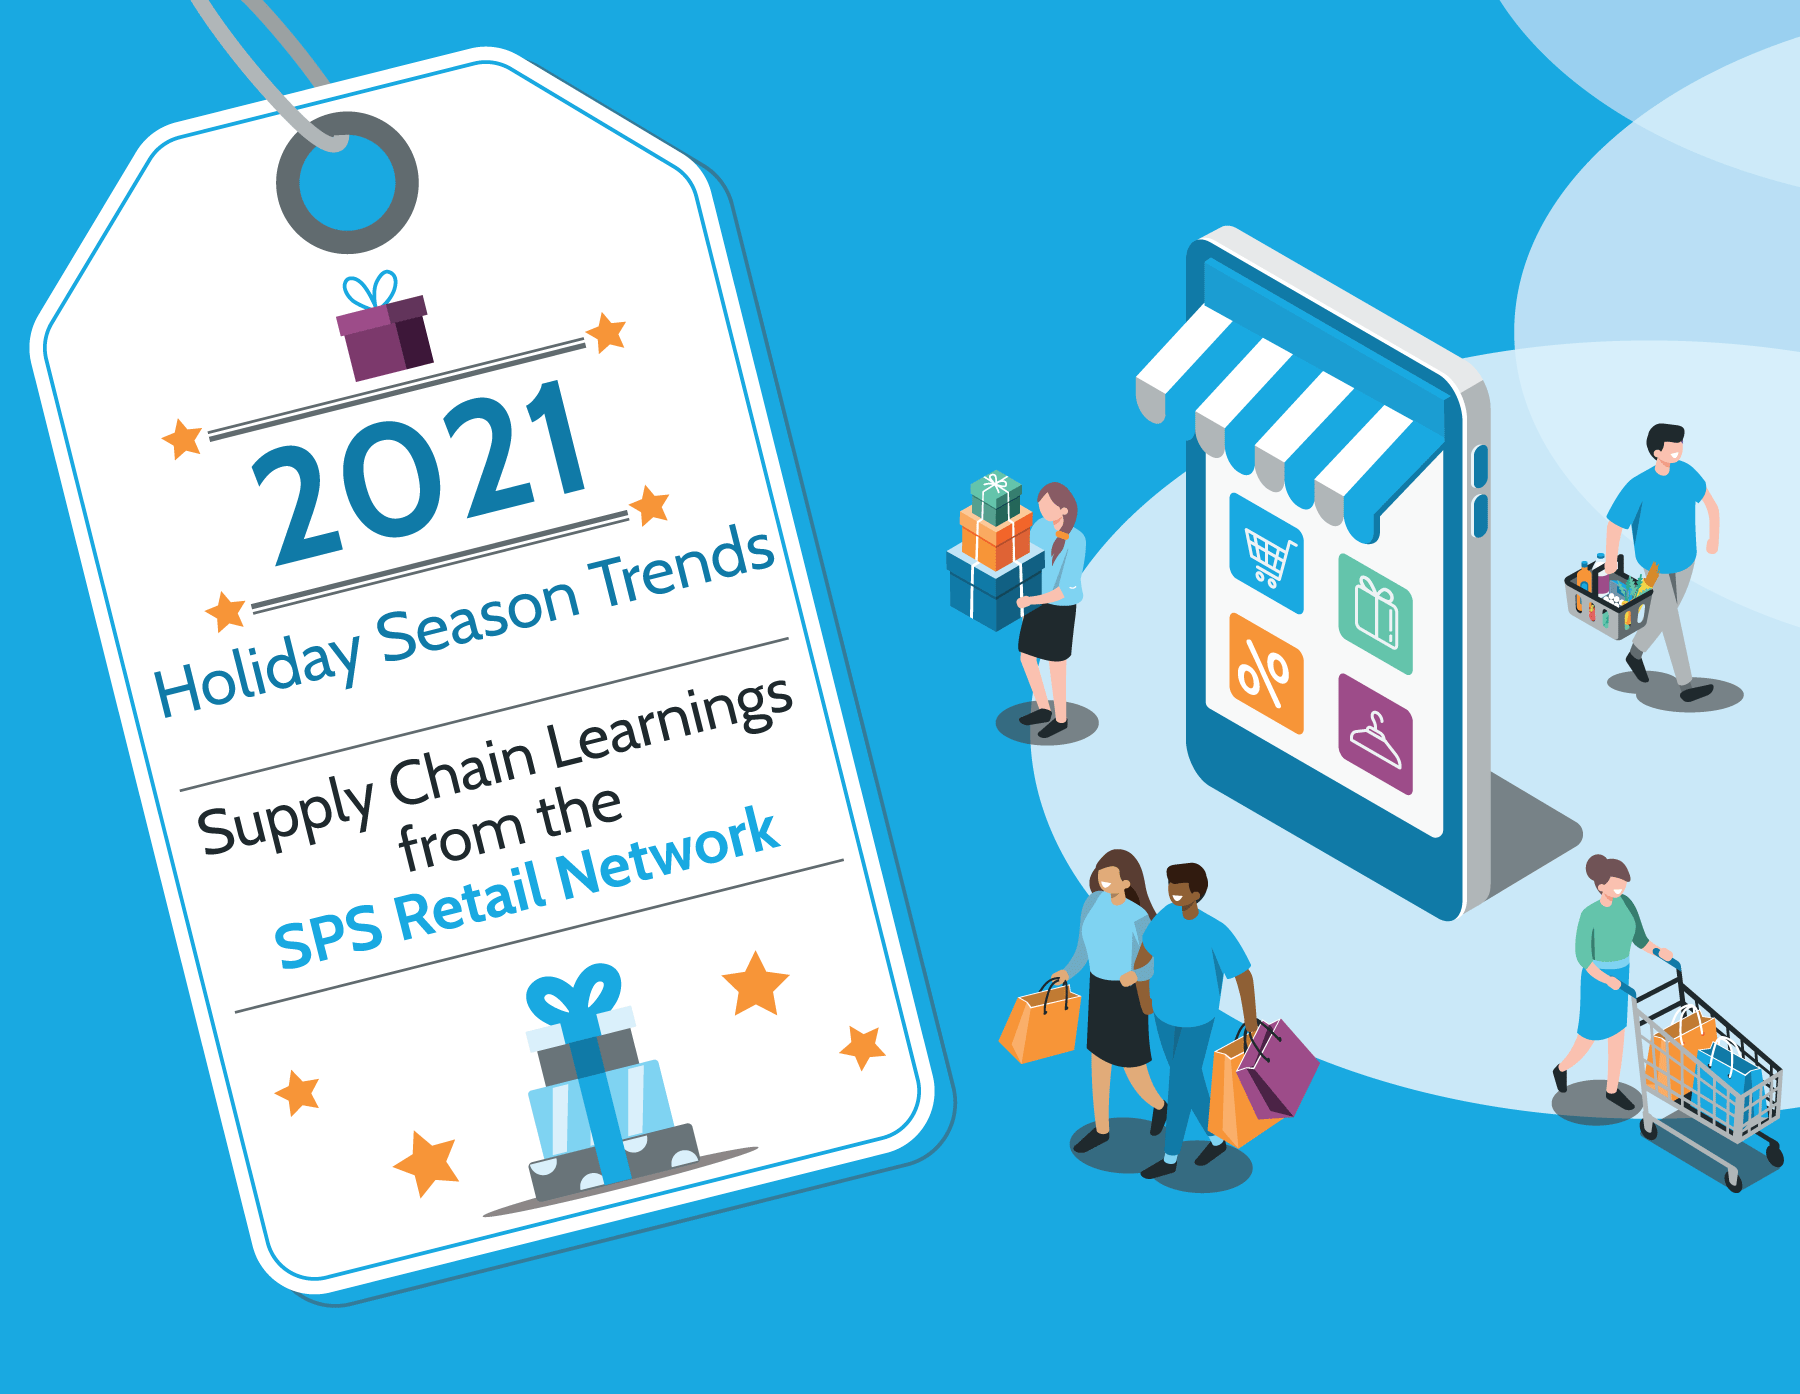 Check out the 2021 Holiday Season trends from SPS Commerce